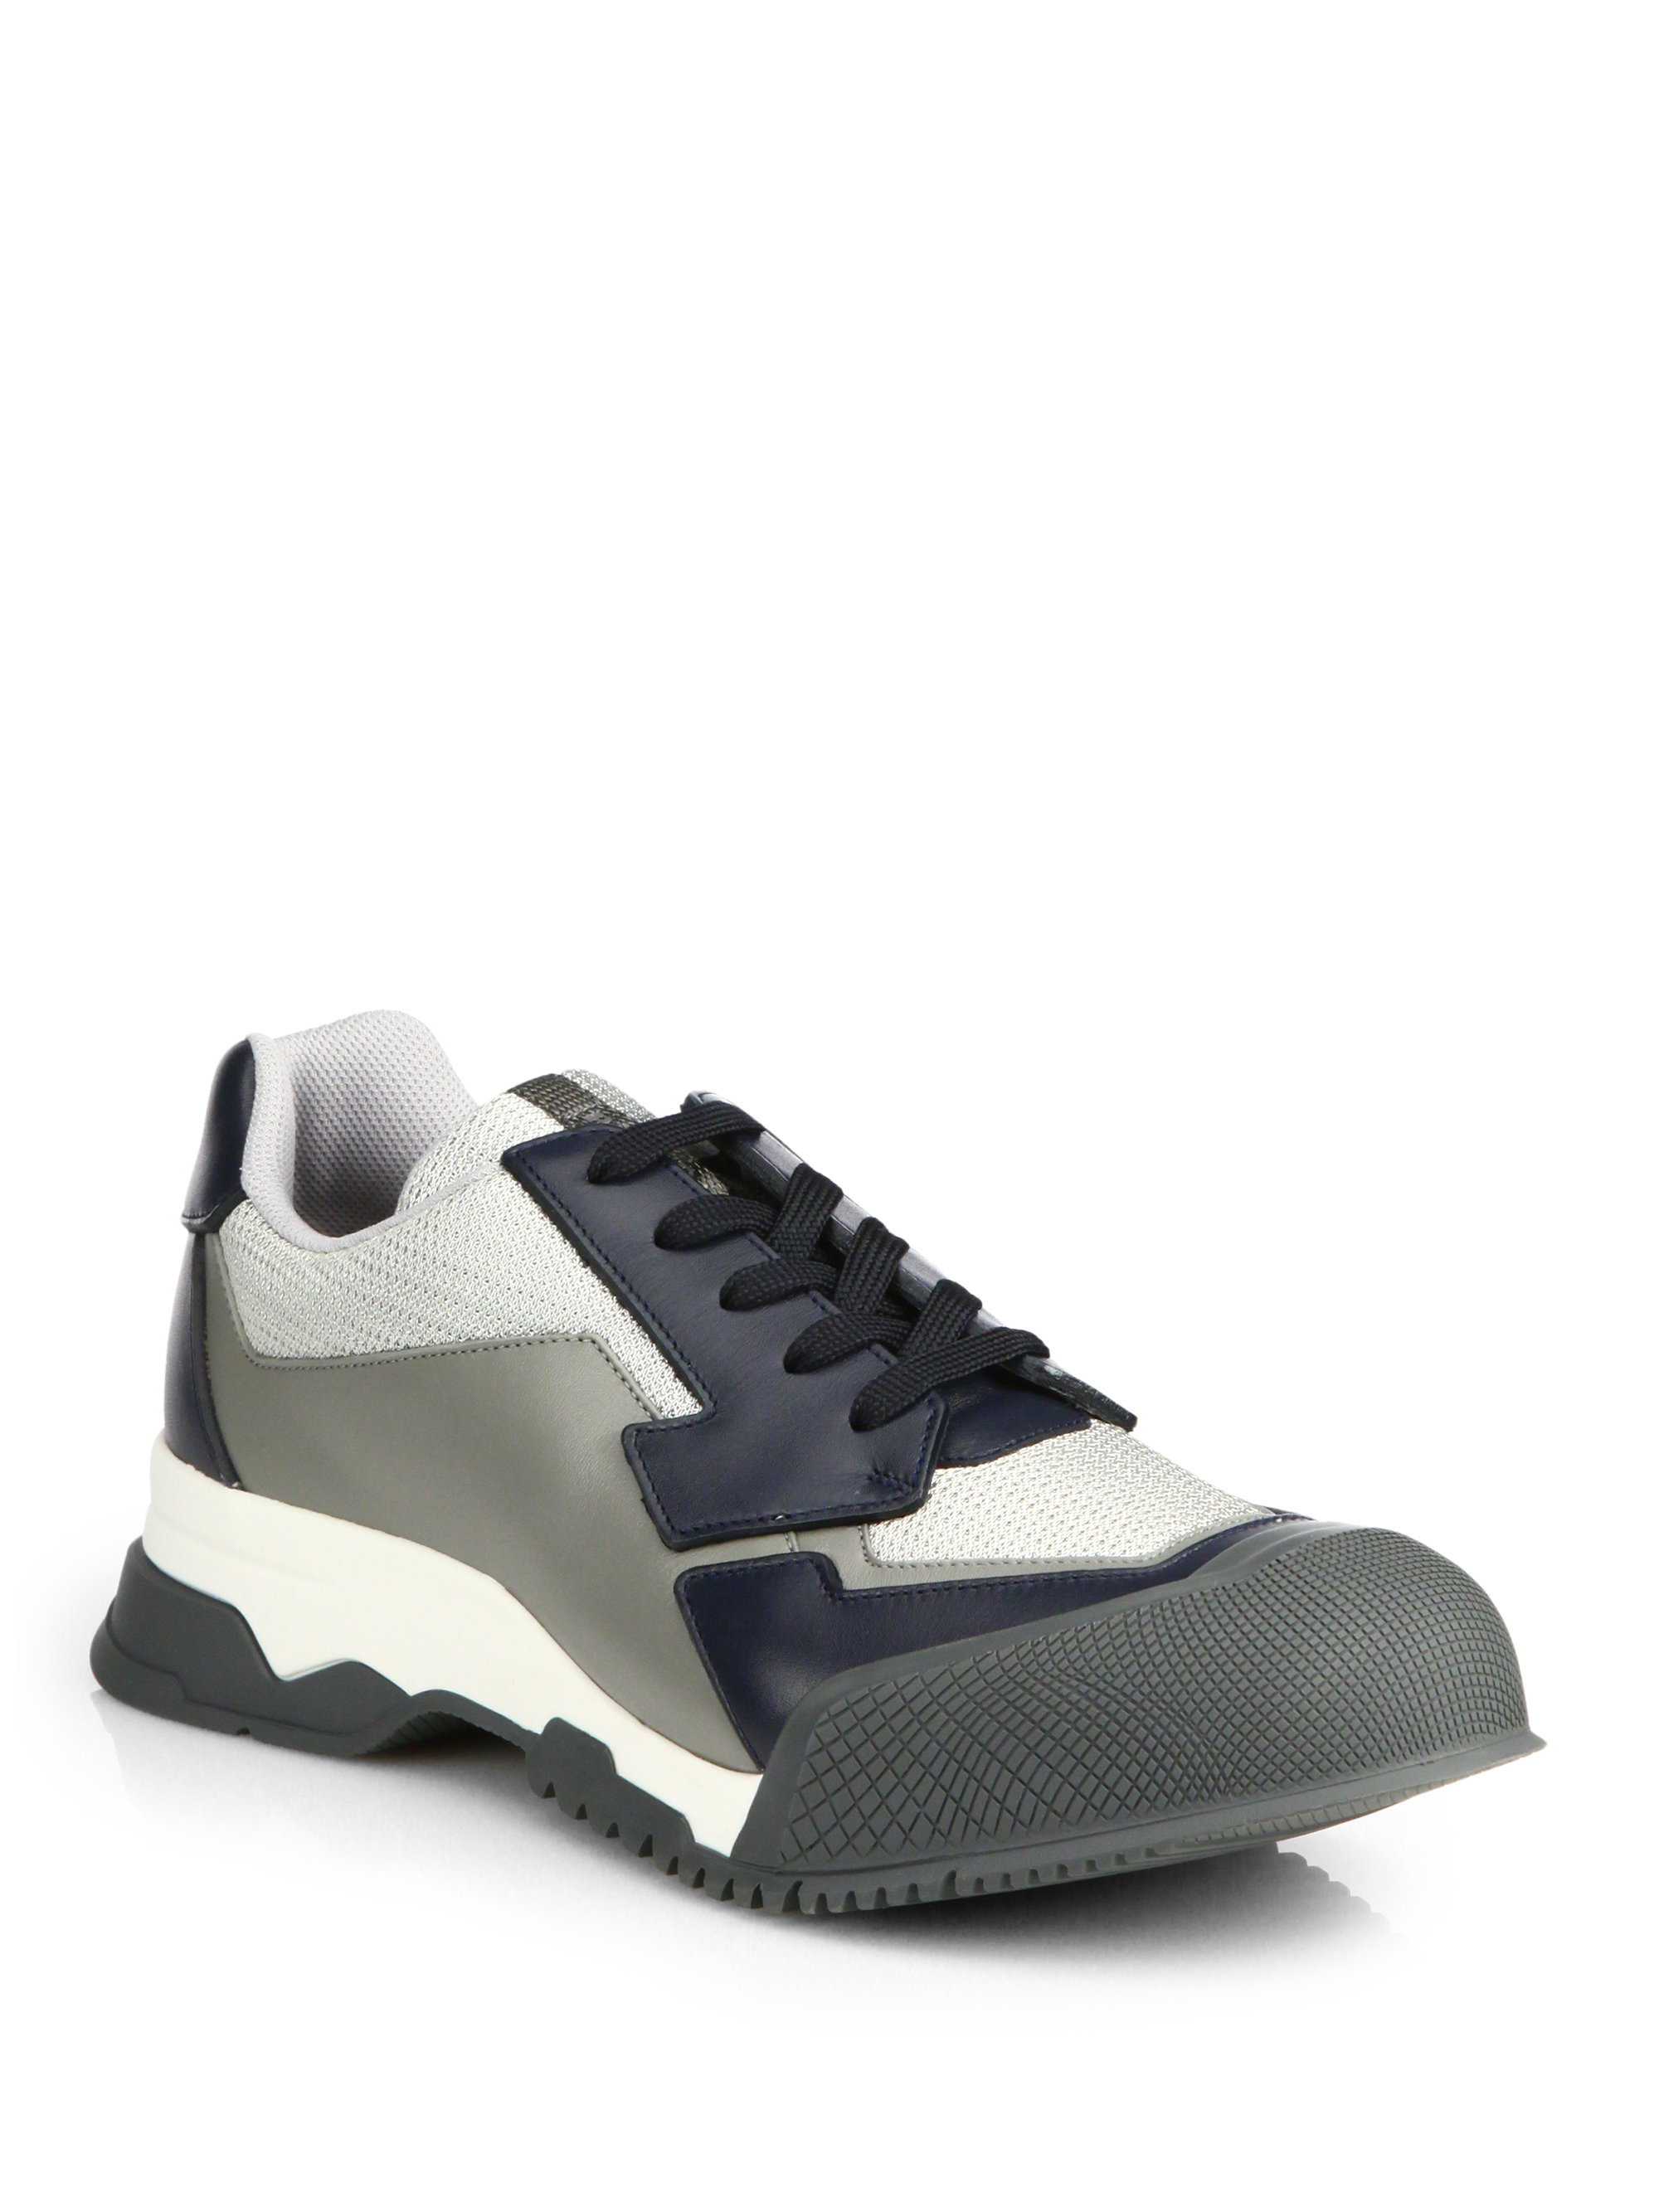 Prada Leather Laced Sneakers in Gray for Men (GREY-NAVY) | Lyst